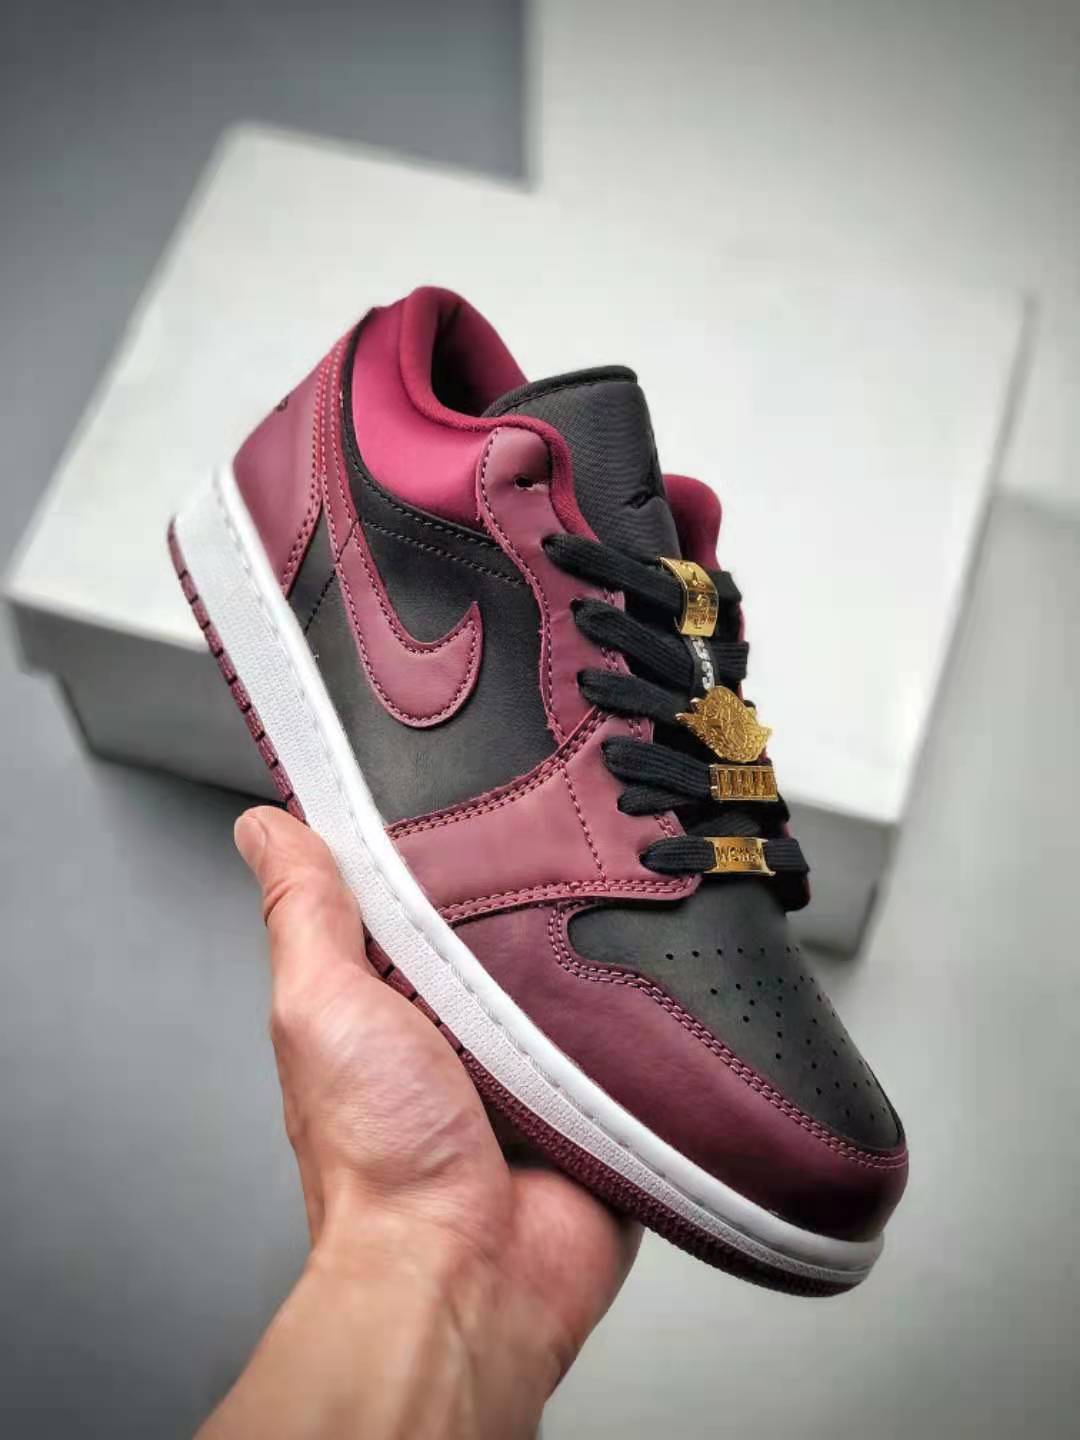 Air Jordan 1 Low SE 'Dark Beetroot' DB6491-600: Stylish and Bold Sneakers for Any Occasion